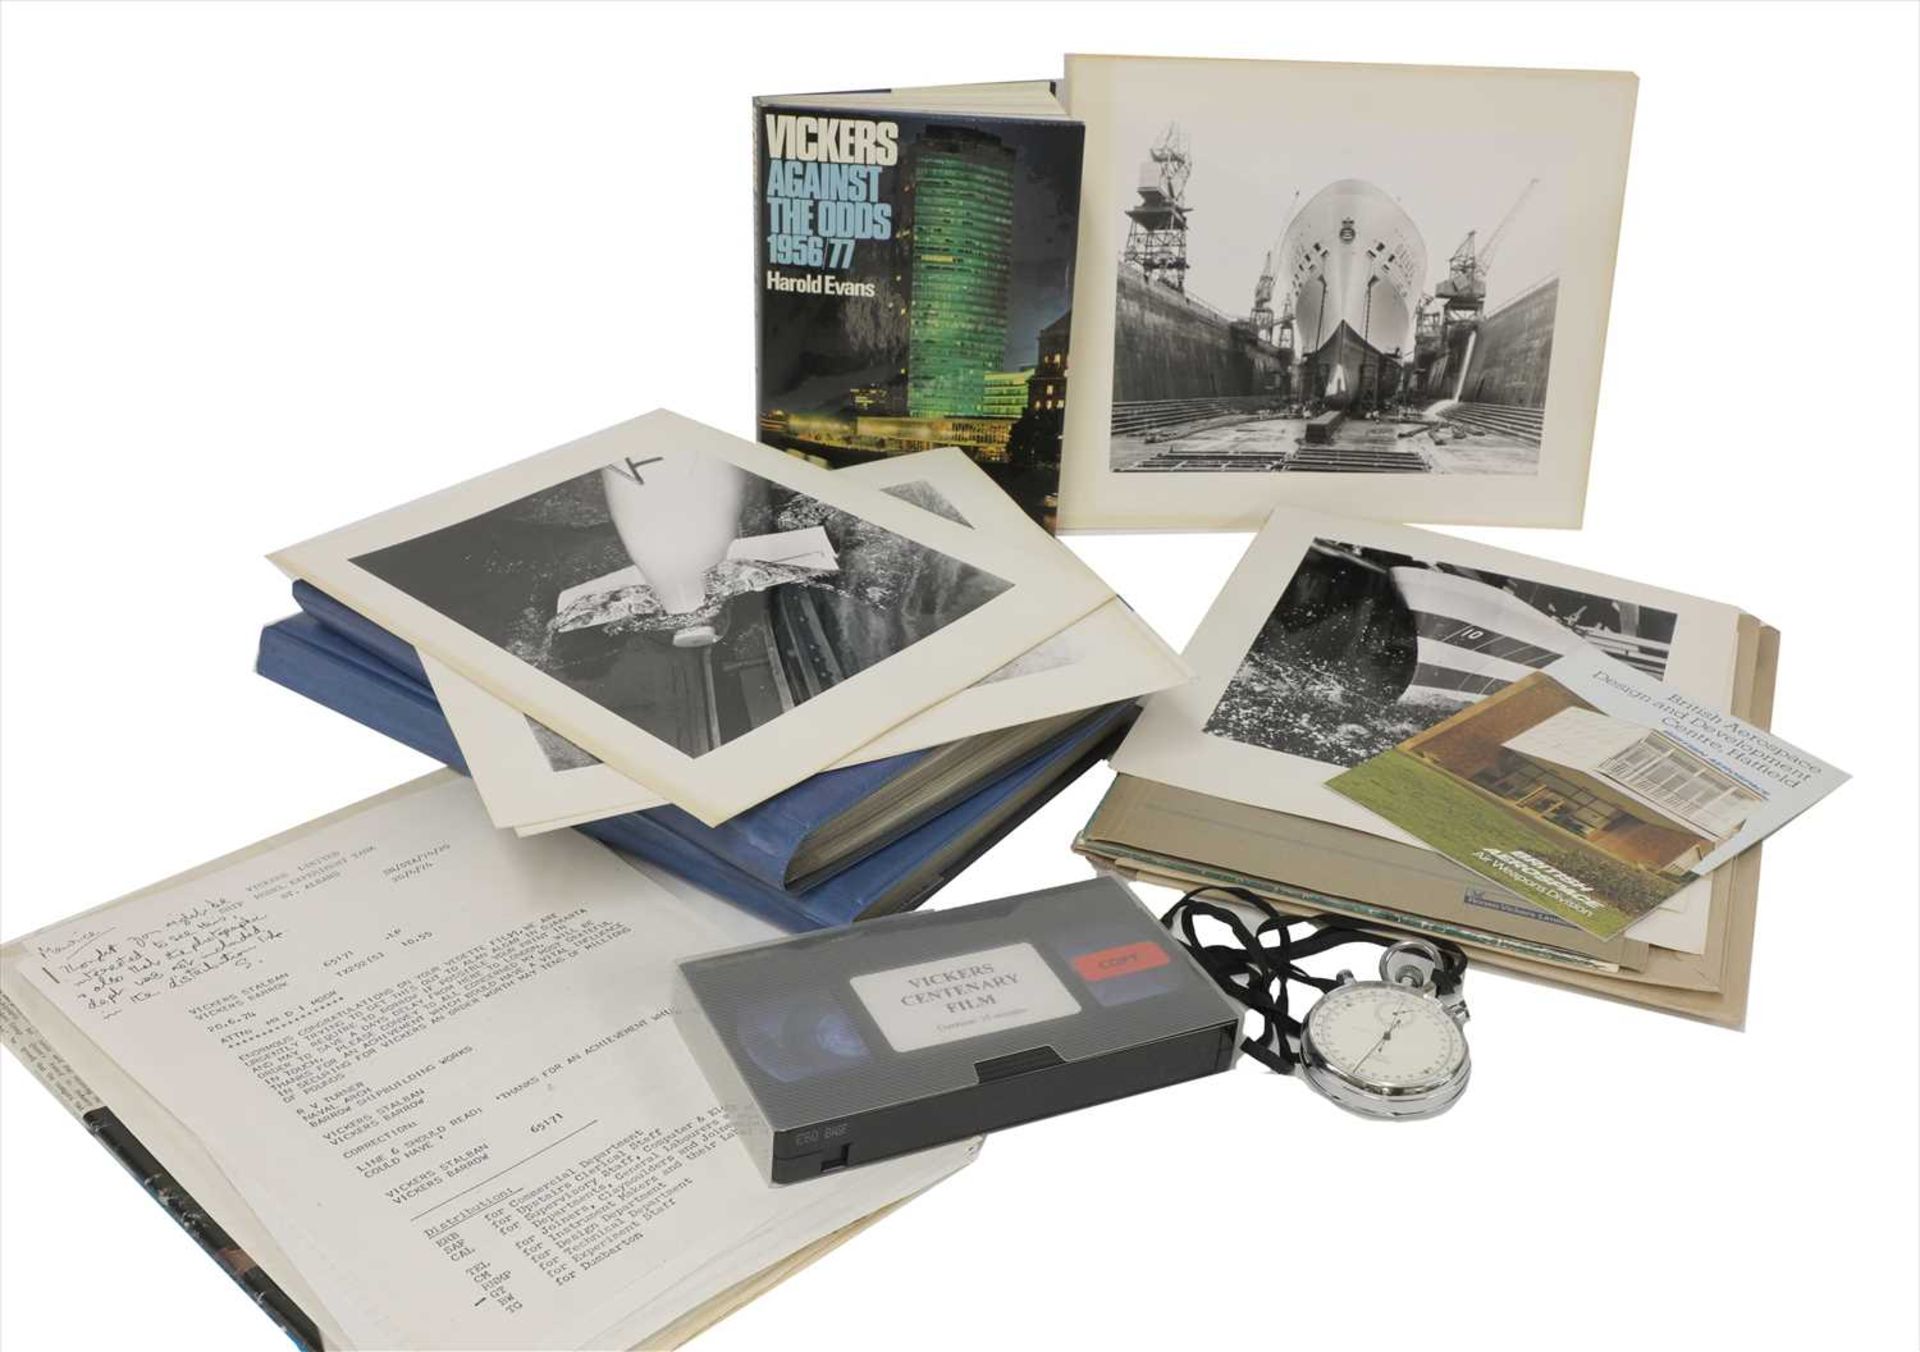 A number of documents and photographs relating to the Vickers Ship Model Experiment Tanks